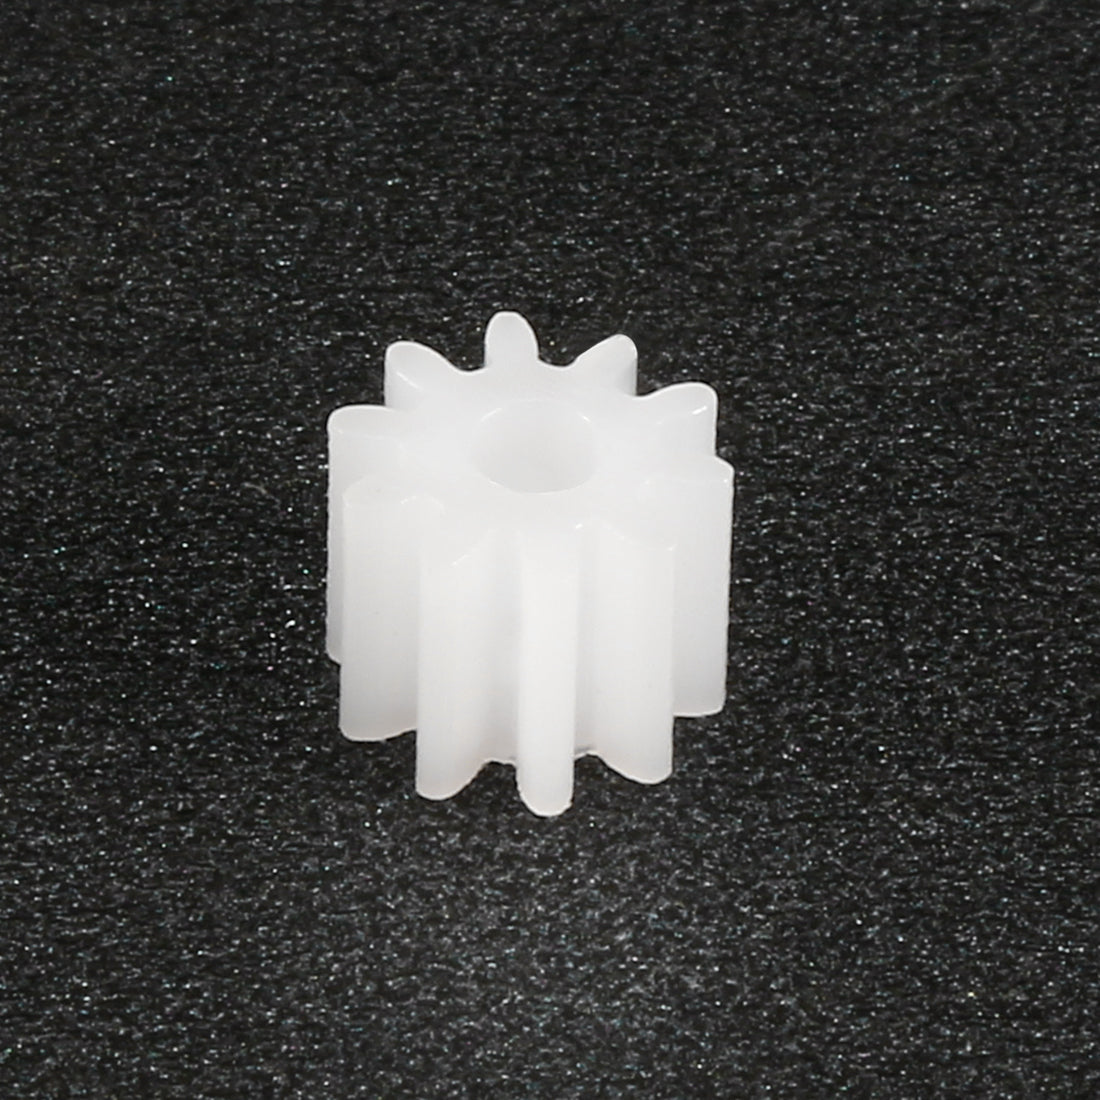 uxcell Uxcell 50Pcs 102A Plastic Gear Accessories 6mm OD with 10 Teeth for DIY Car Robot Motor